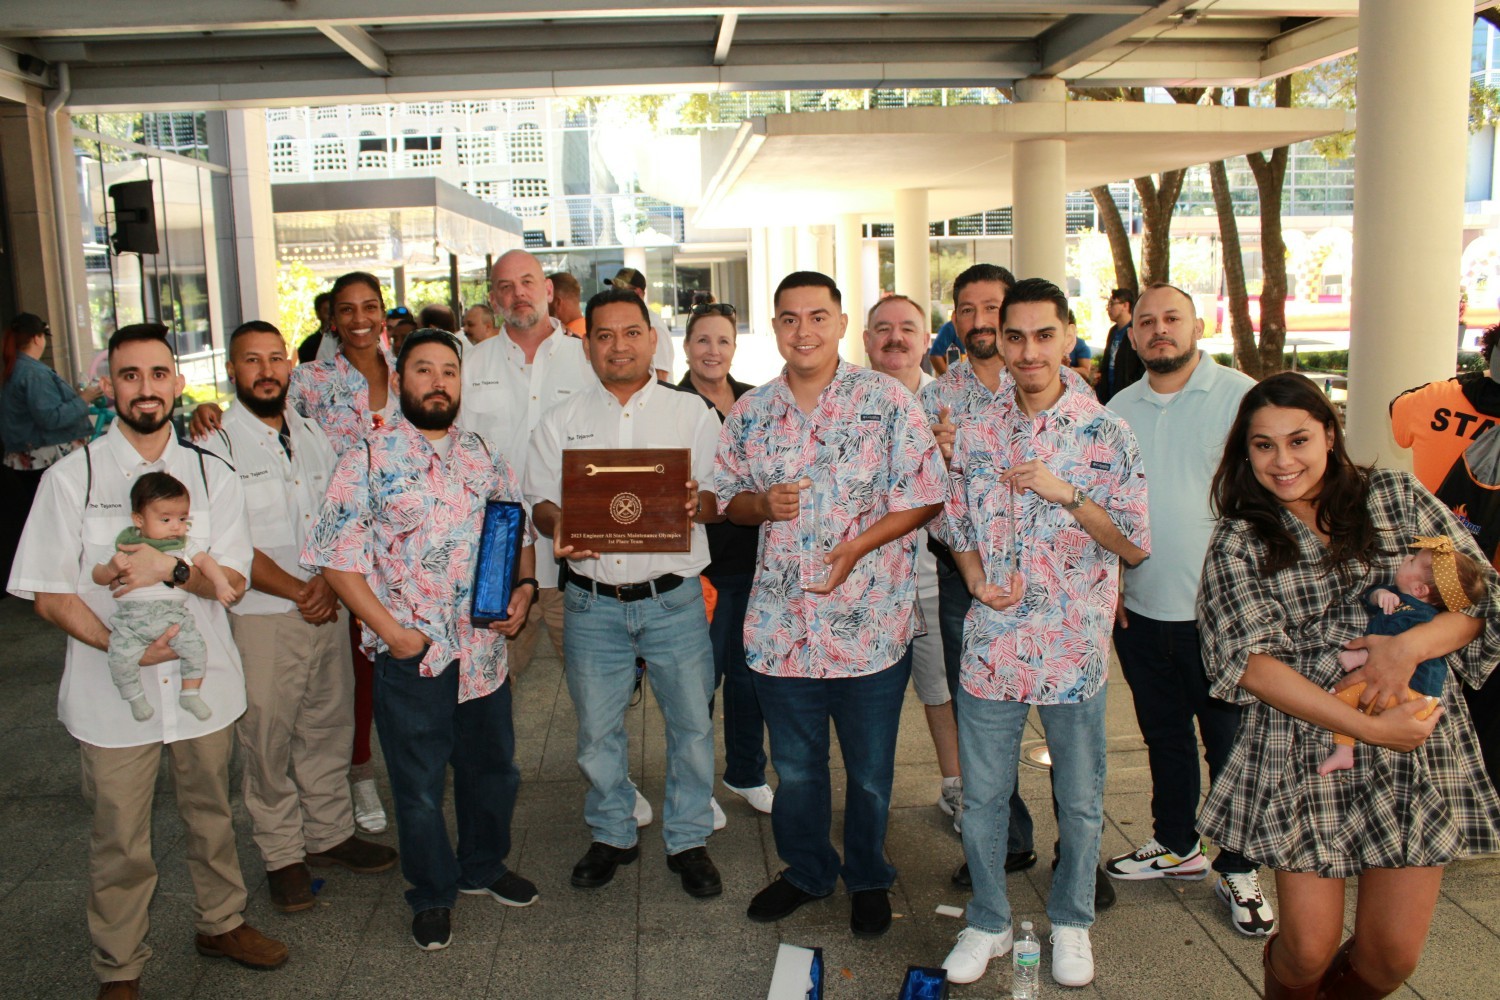 Our engineers triumphed and won first place in the Houston BOMA Engineer Maintenance Olympics! 